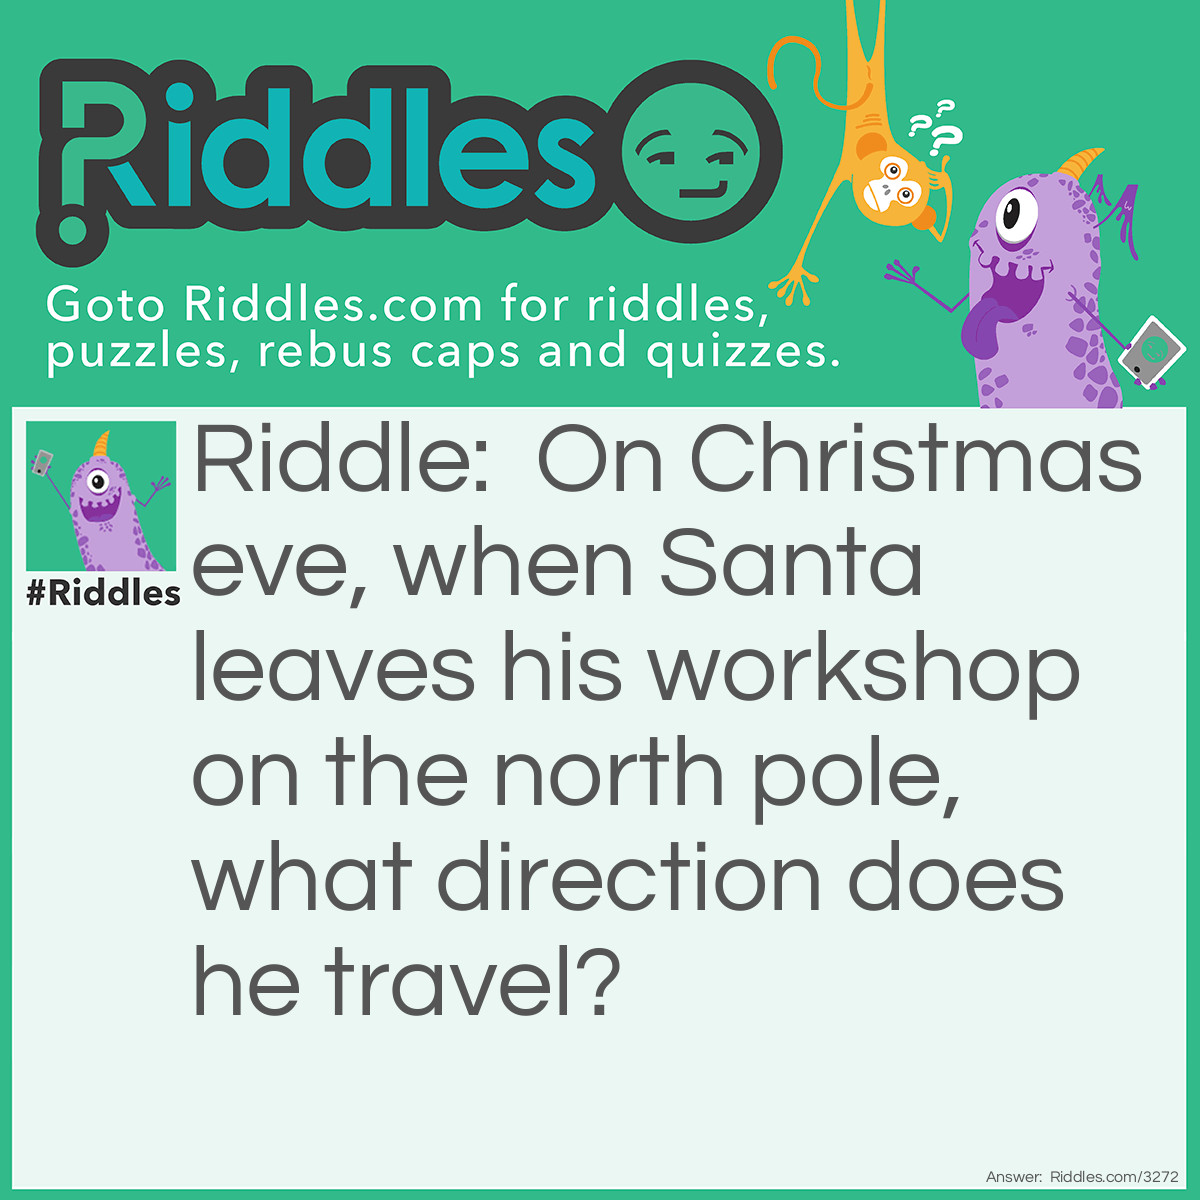 Riddle: On Christmas eve, when Santa leaves his workshop on the north pole, what direction does he travel? Answer: South.  If you're on the North Pole the only direction you can go is south.